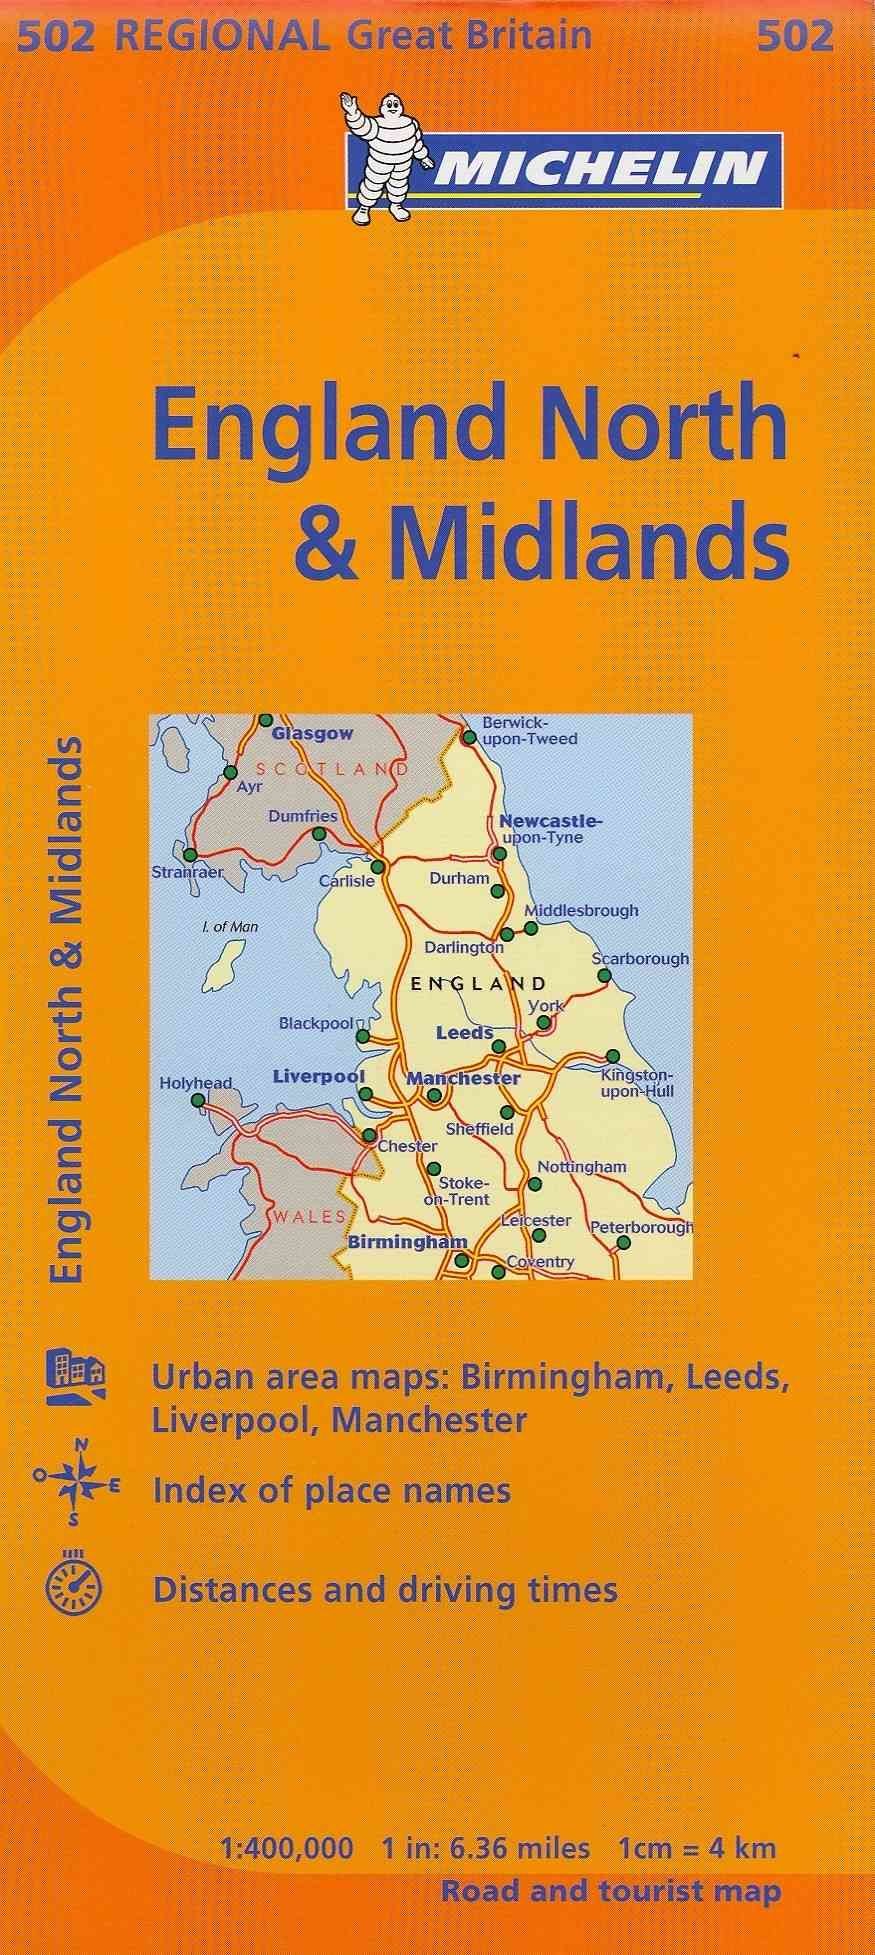 Michelin Map Great Britain: England North & the Midlands 502